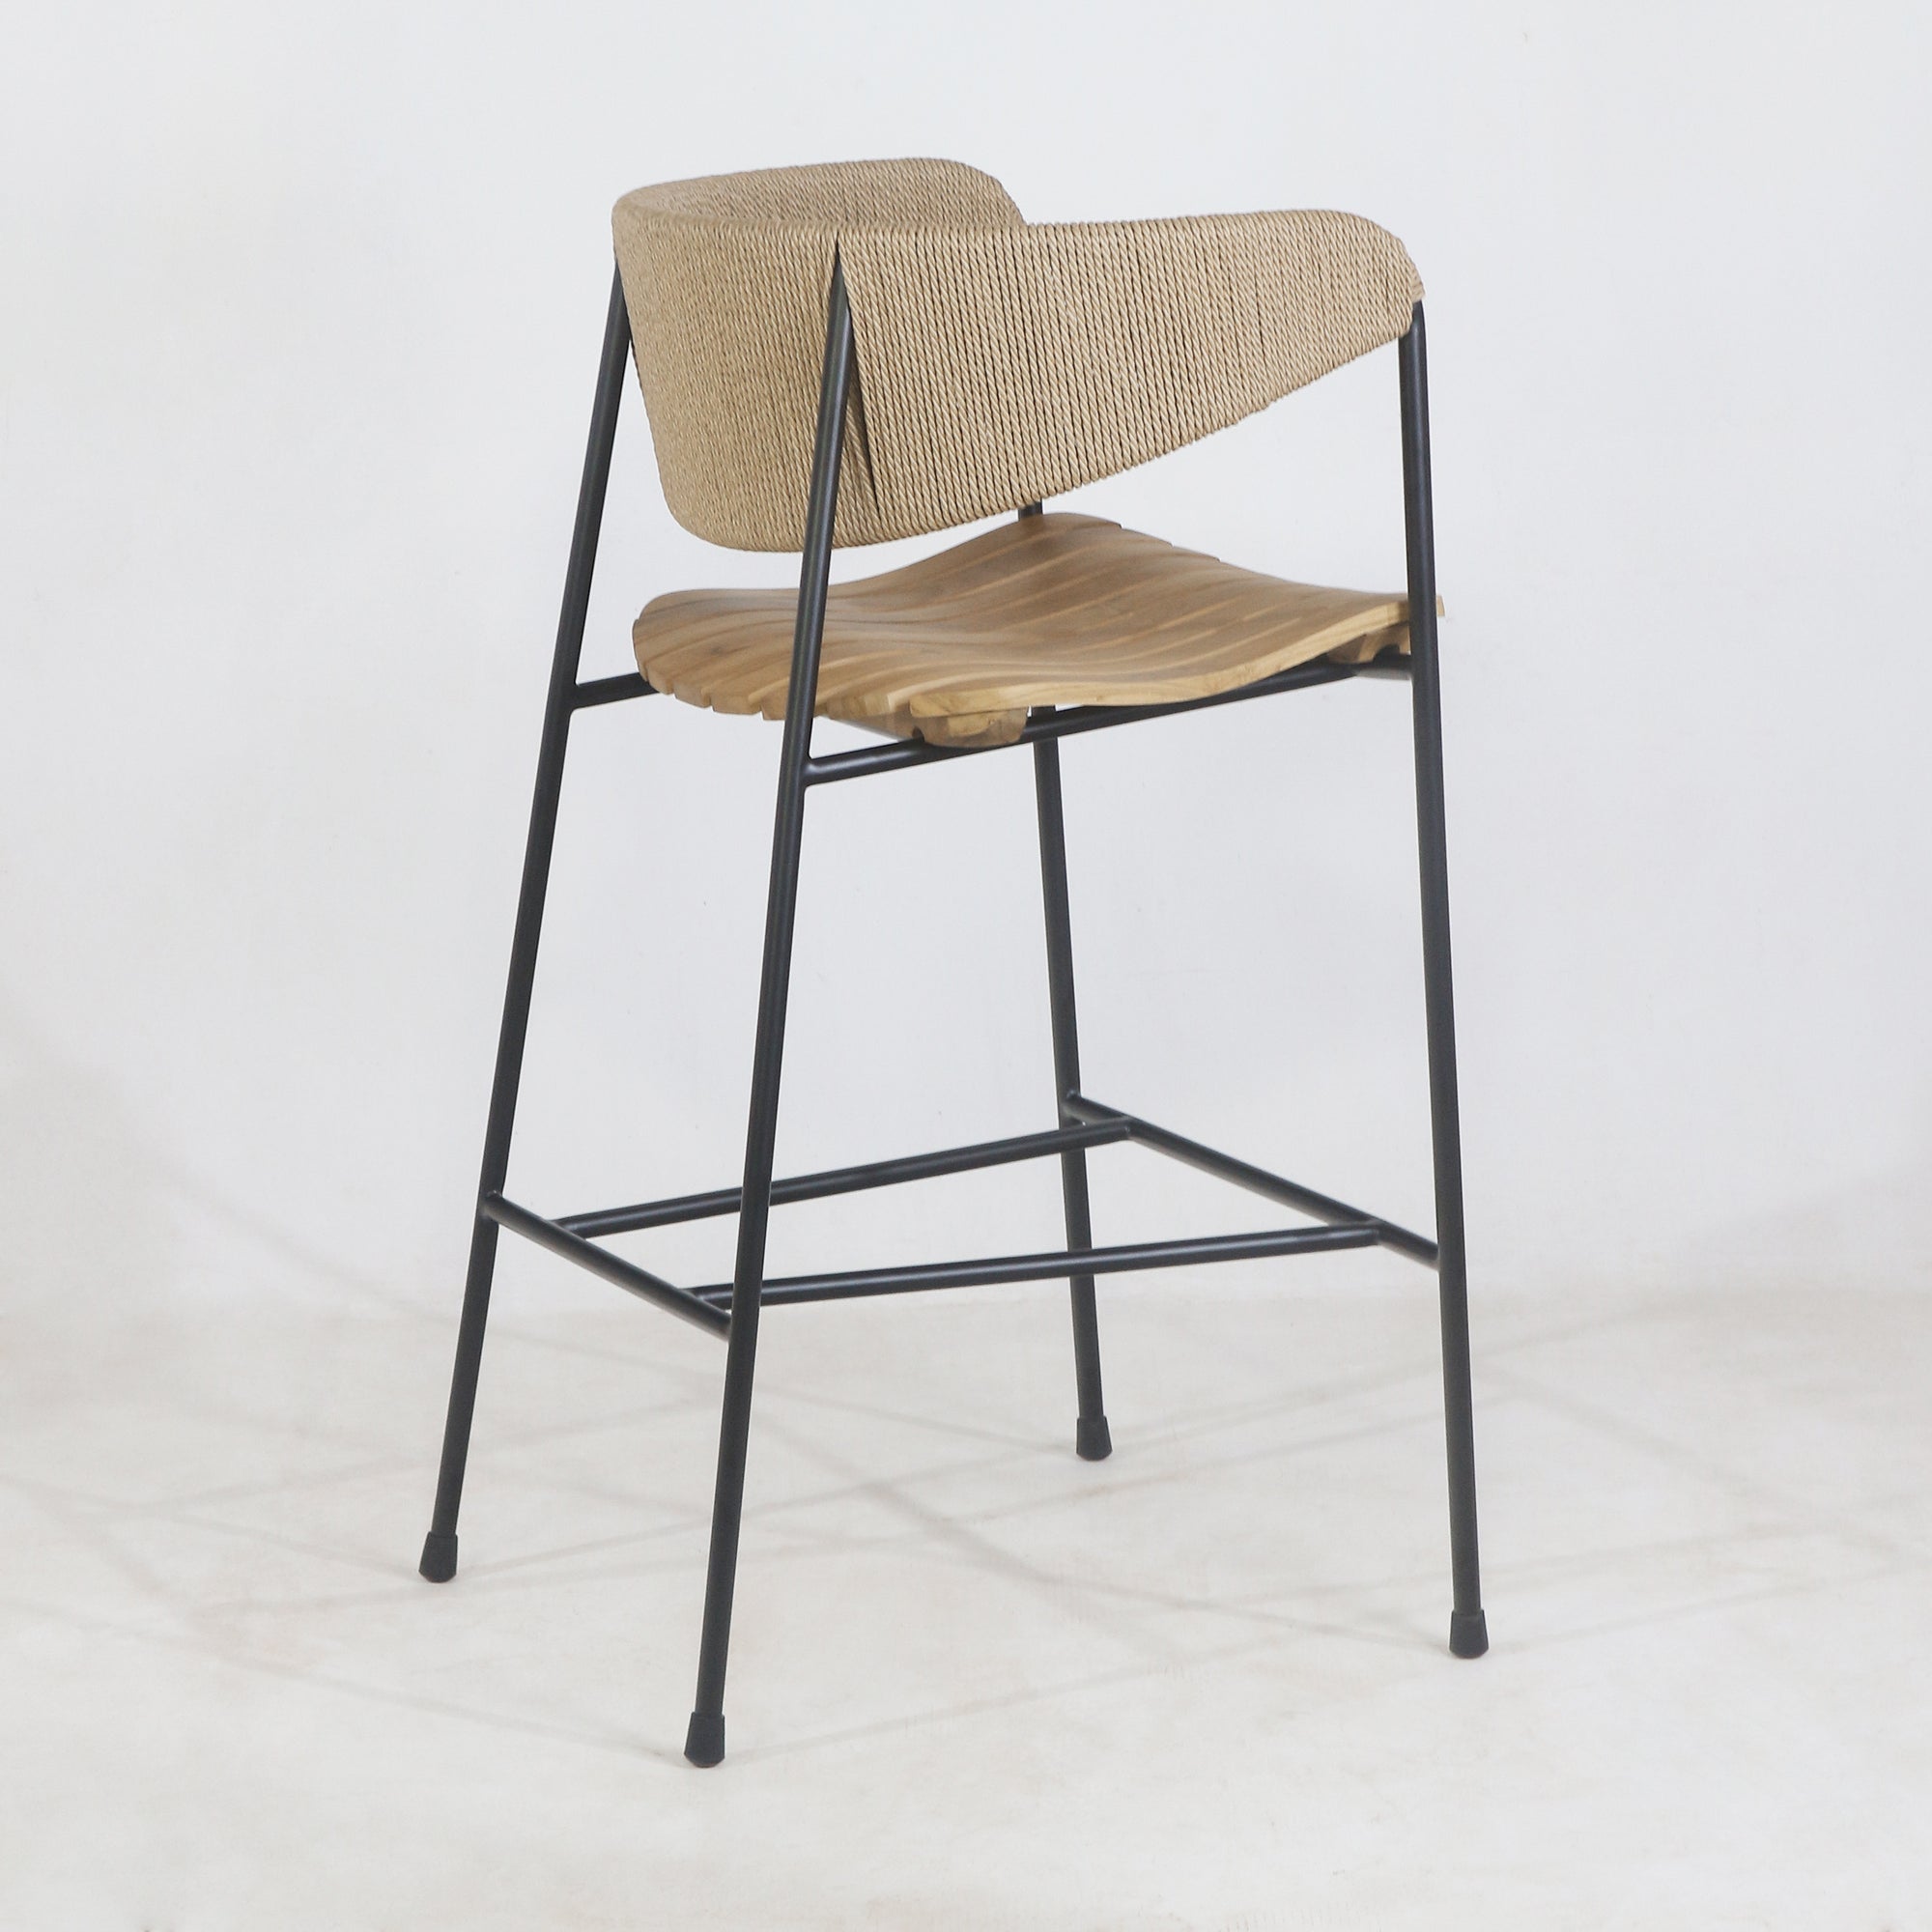 Clara Stool with Teak Seat and Rush Weaving Backrest